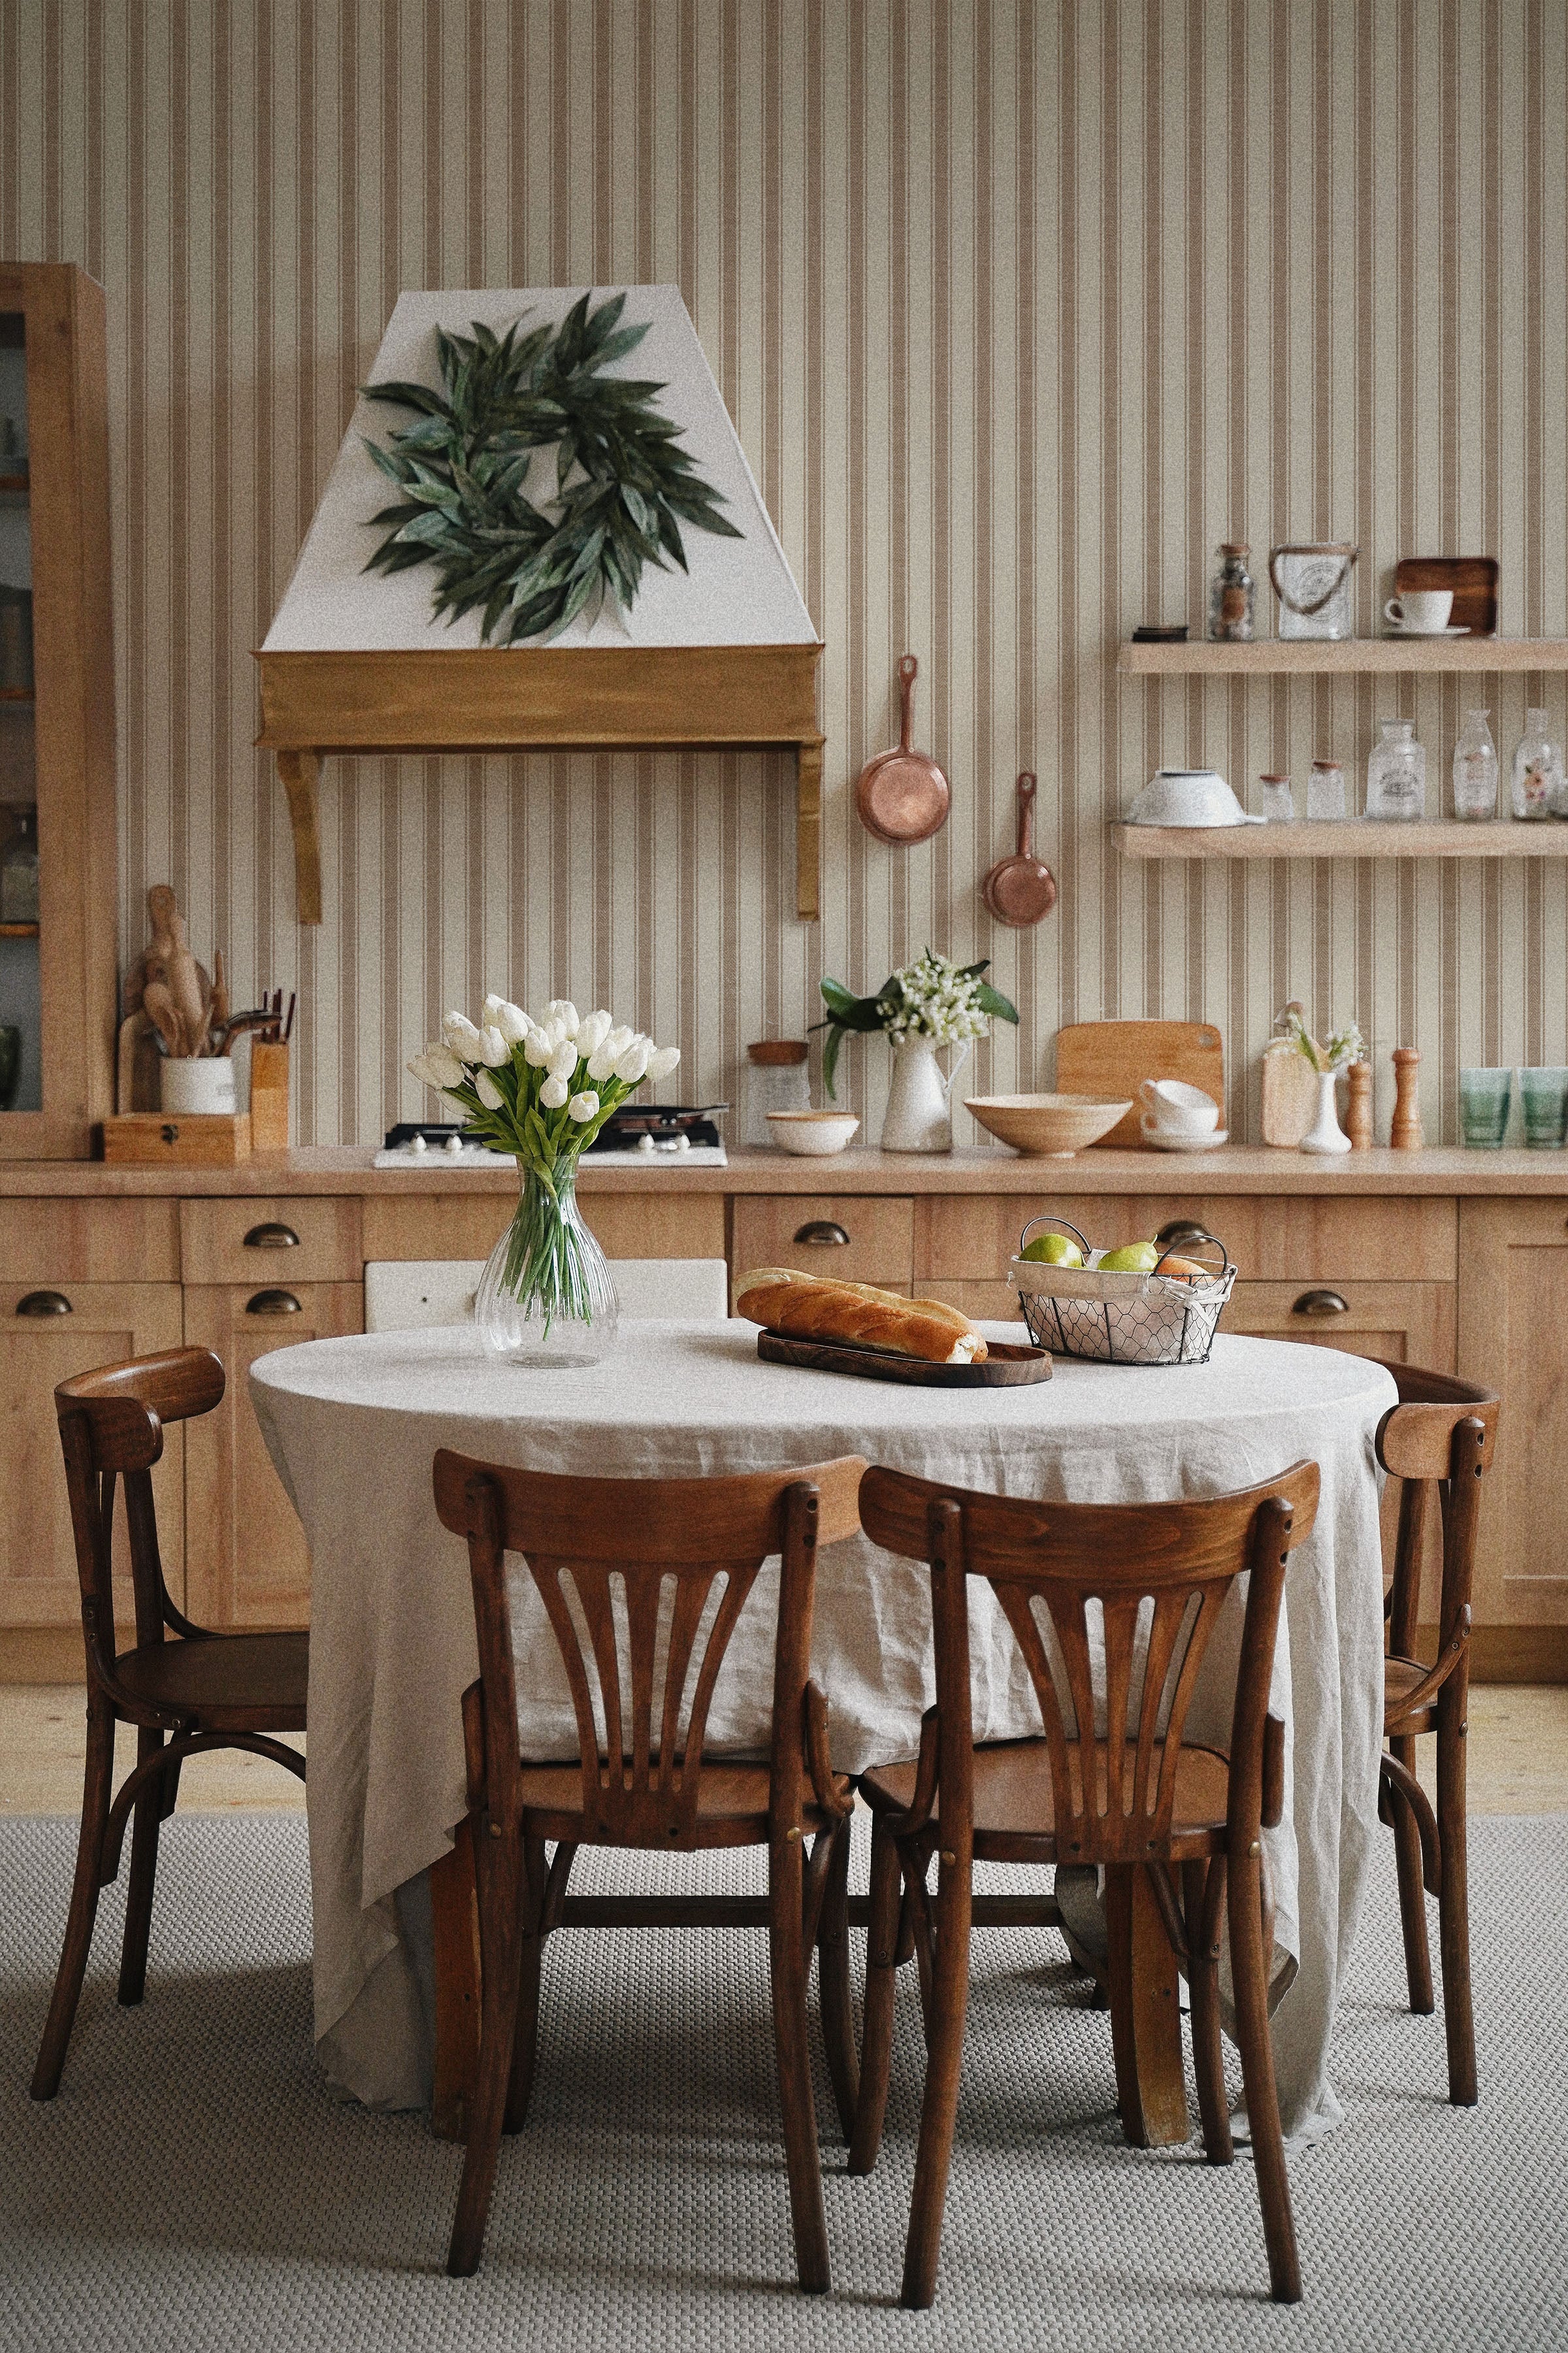 A homely dining area where the Striped Fabric Wallpaper serves as a backdrop, creating a timeless look that complements the natural wood furniture and a white linen-covered table adorned with a vase of fresh tulips